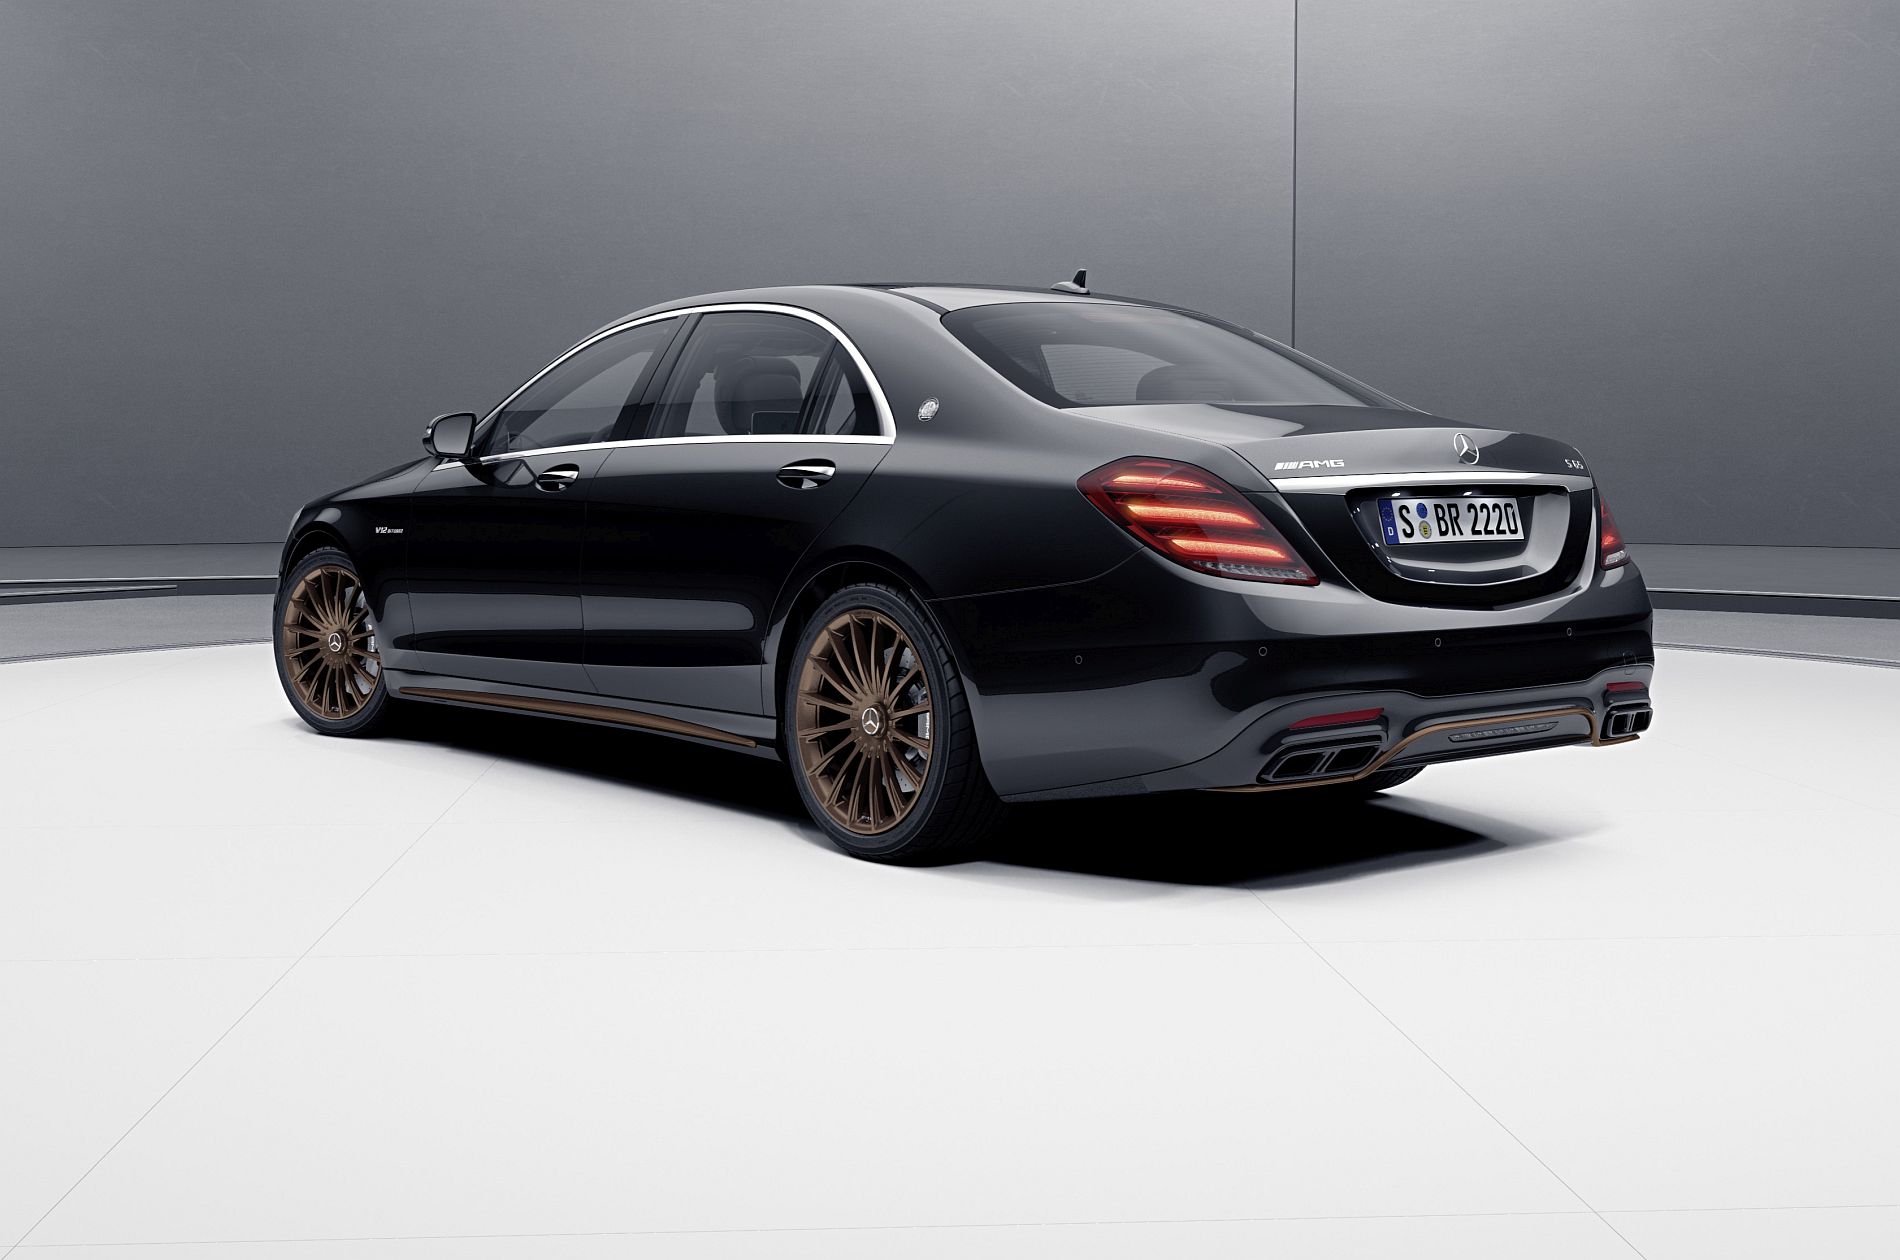 Mercedes-AMG S 65 Final Edition

Mercedes-AMG S 65 Final Edition